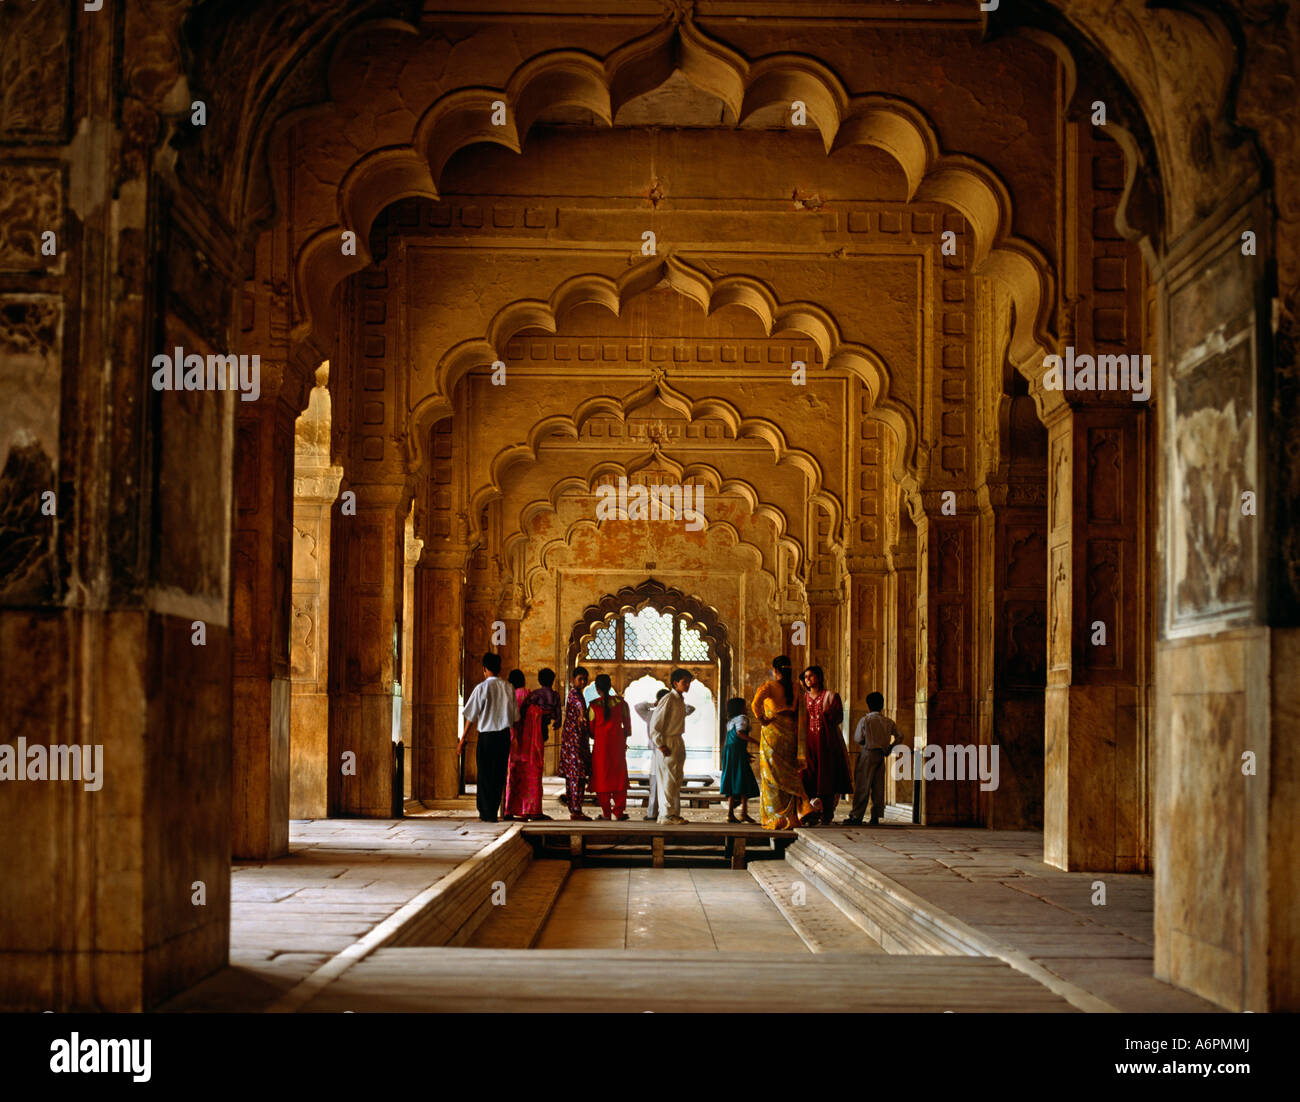 Albums 93+ Pictures In Which City Is This Red Fort Located Updated